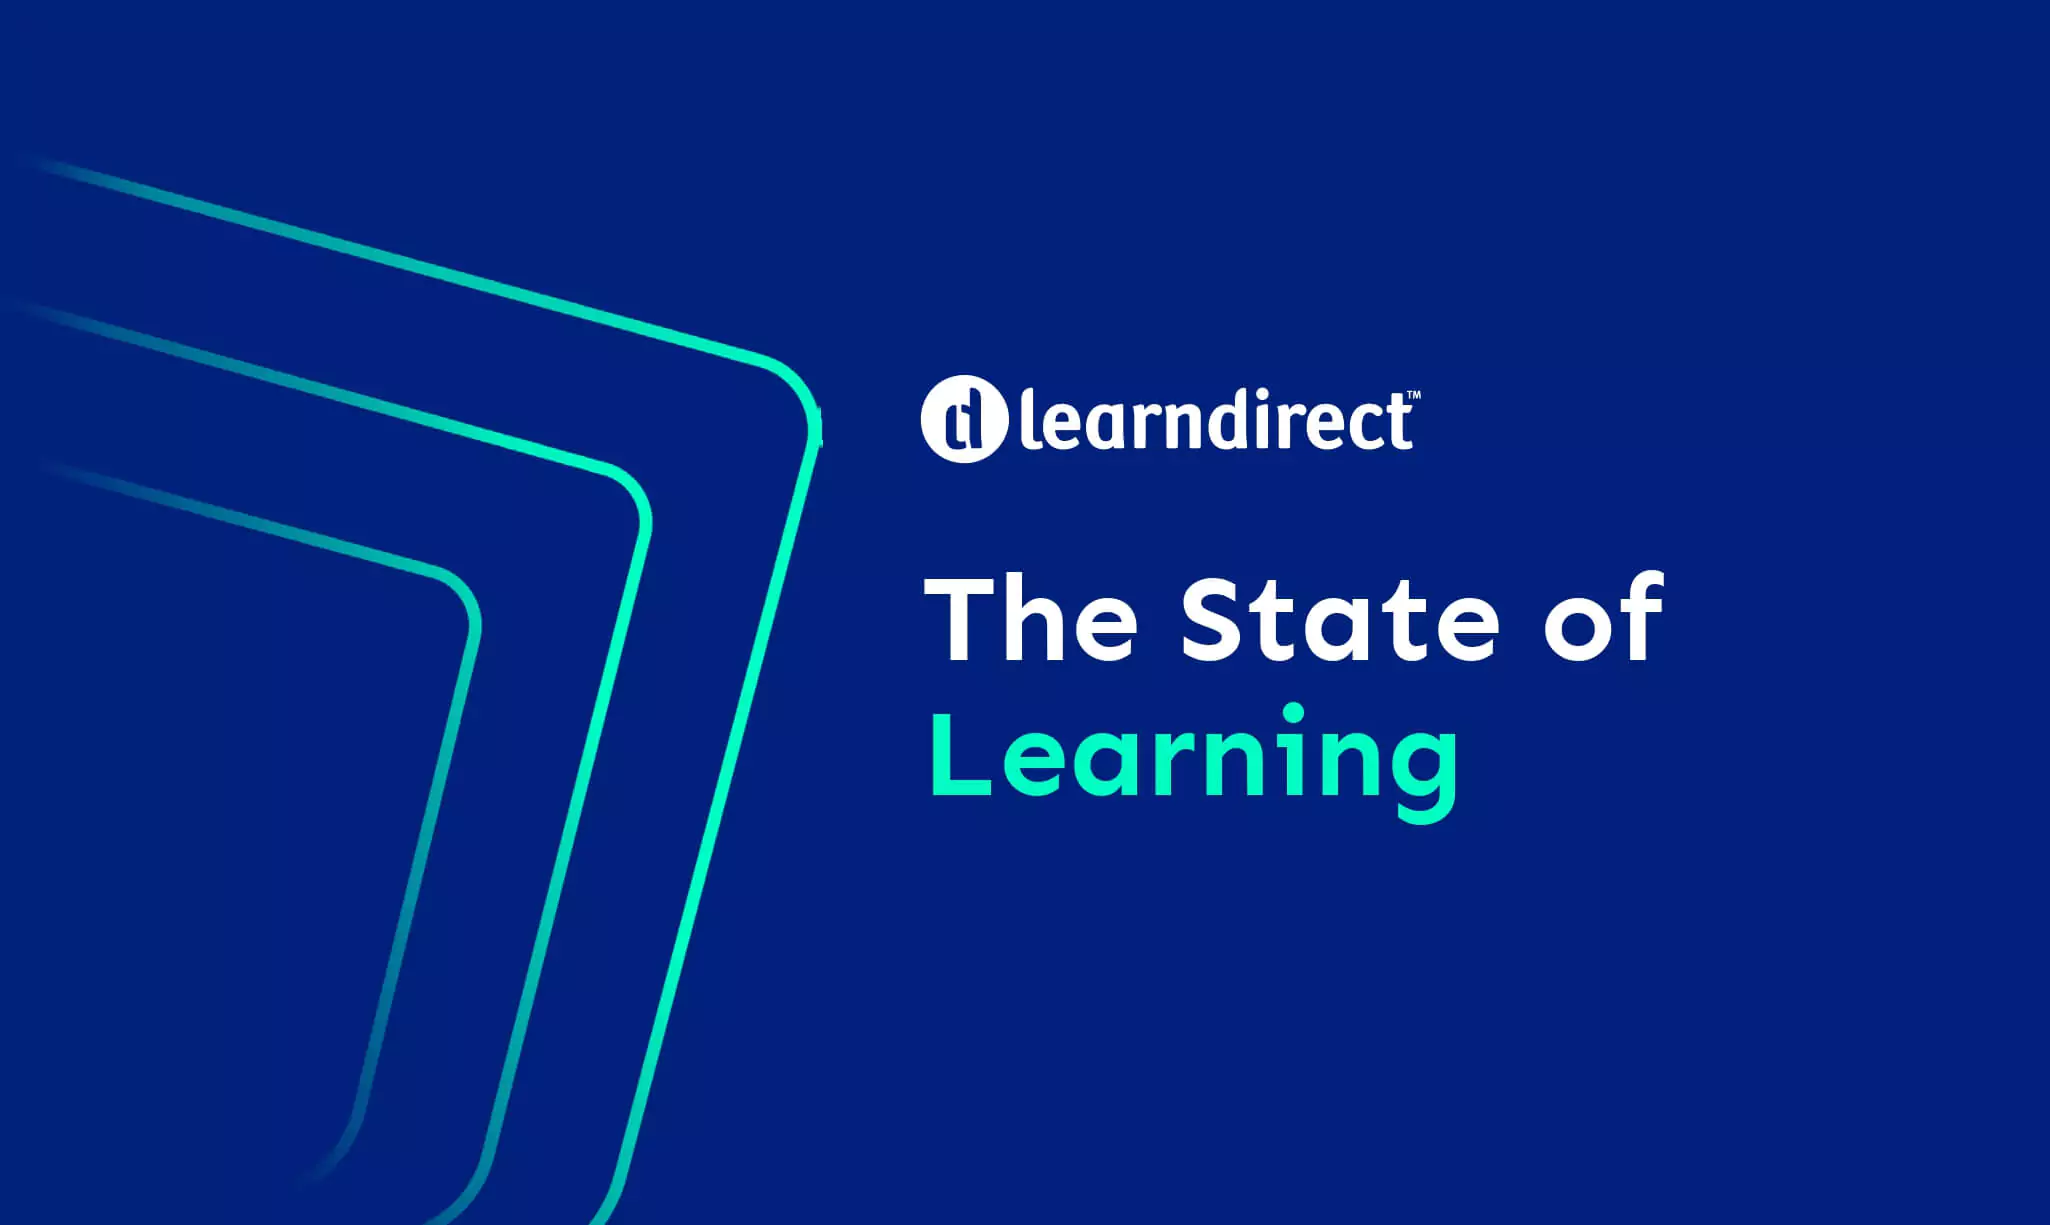 learndirect's The State of Learning Report front cover